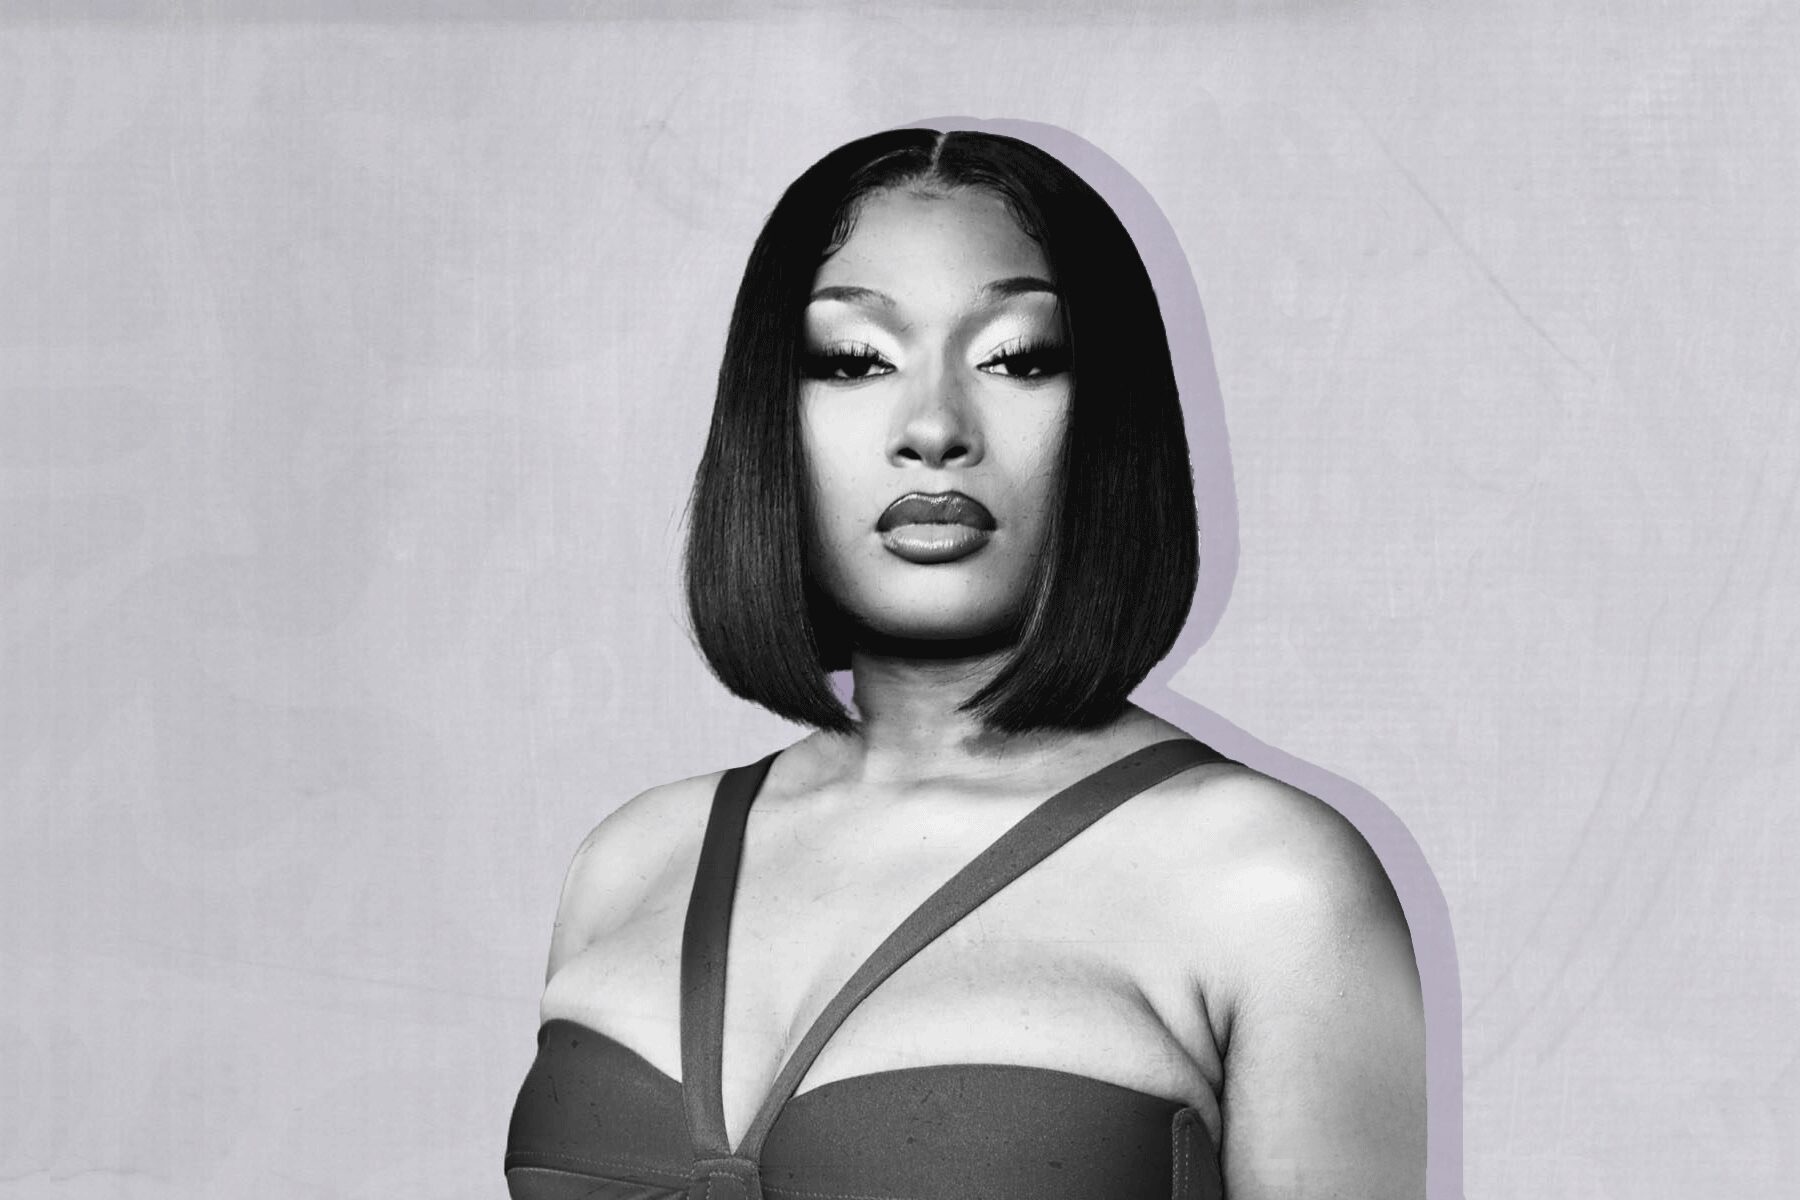 Megan Thee Stallion testimony and the Catch-22 for Black women who seek justice